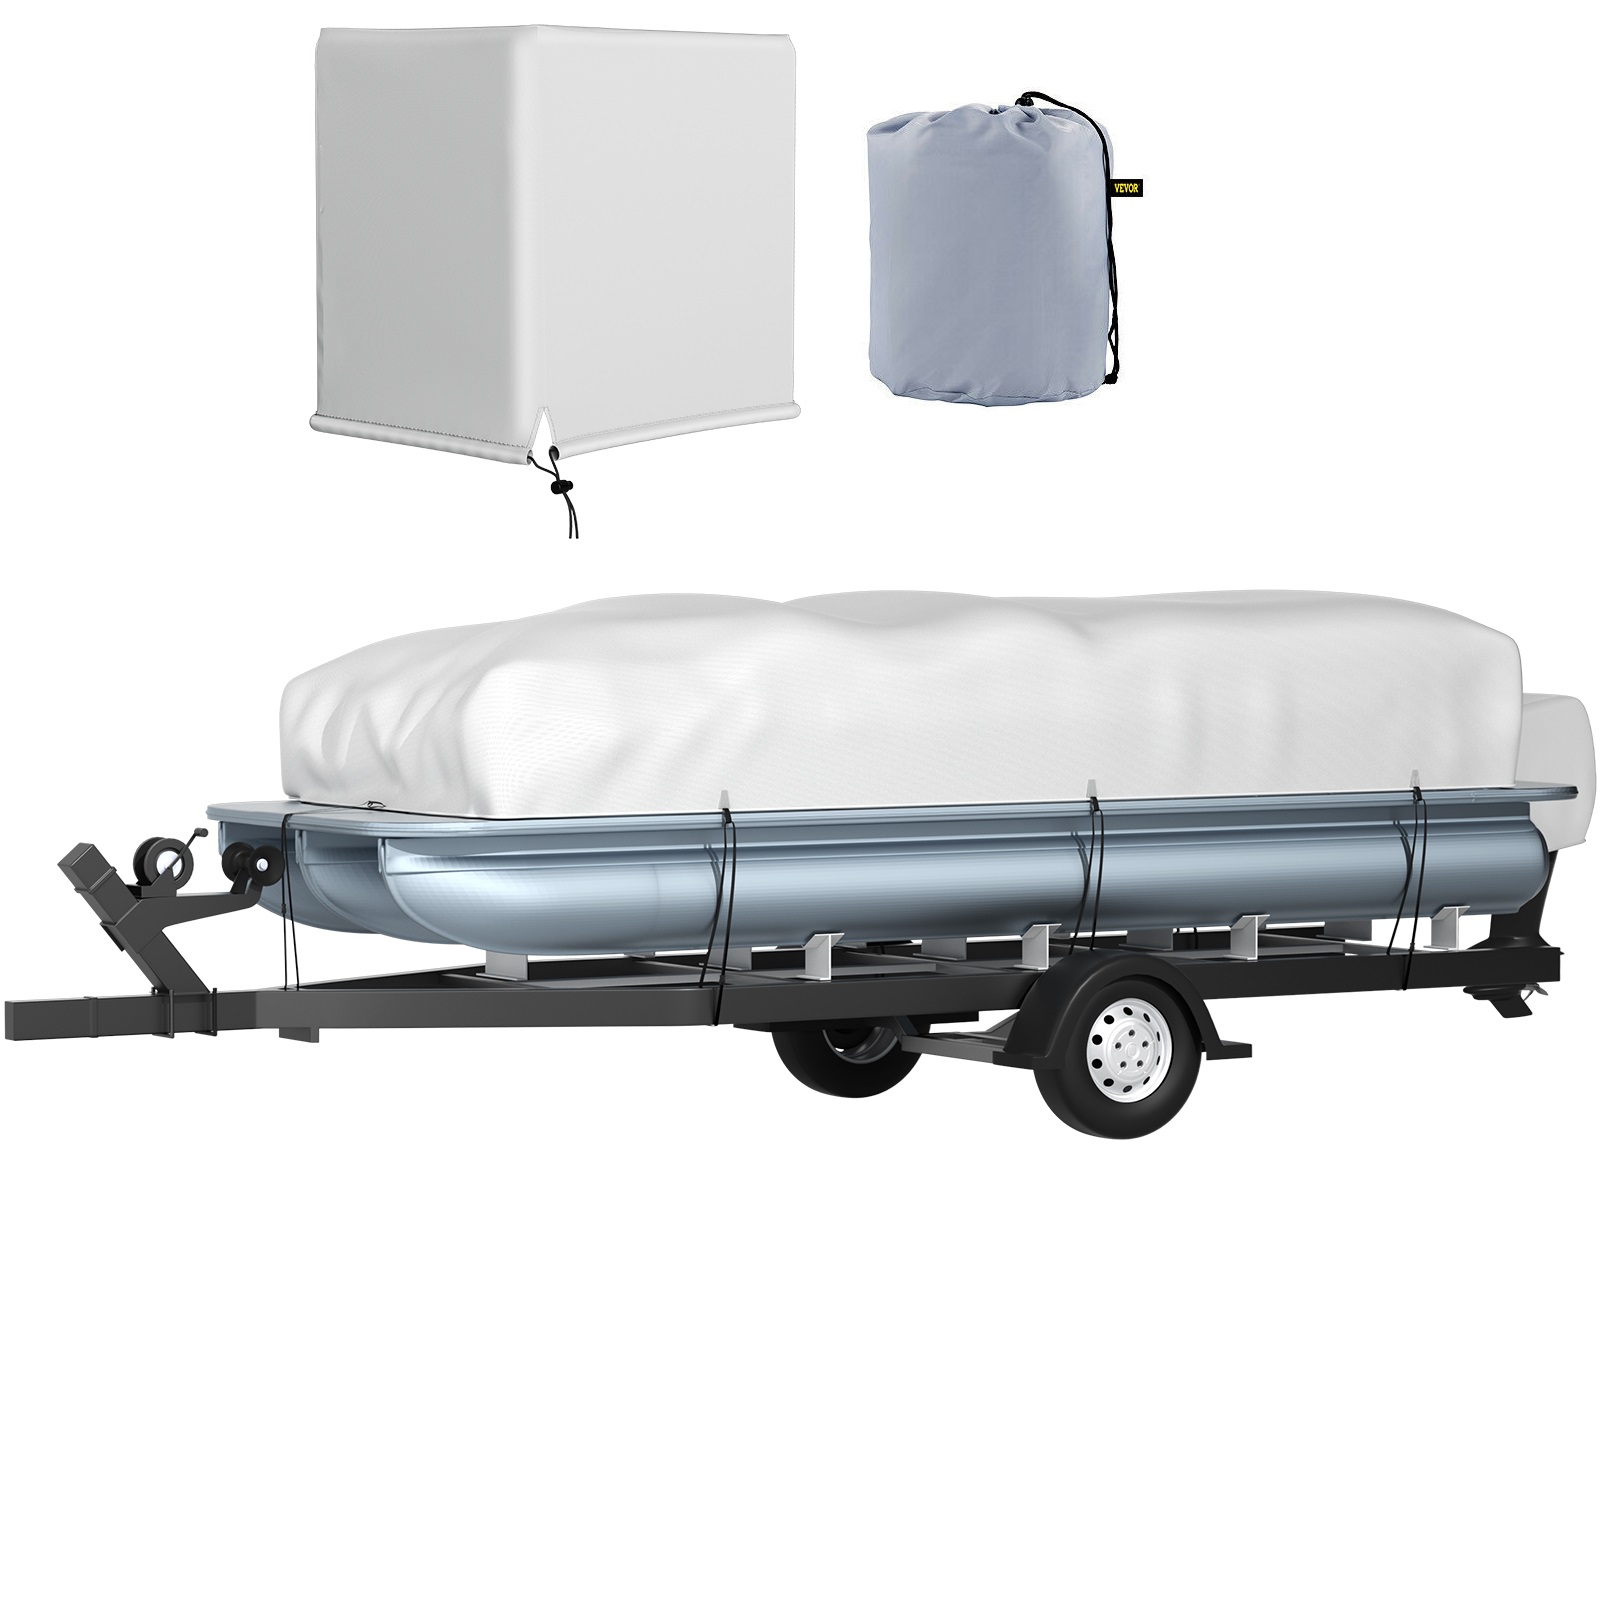 VEVOR Pontoon Boat Cover, Fit for 25'-28' Boat, Heavy Duty 600D